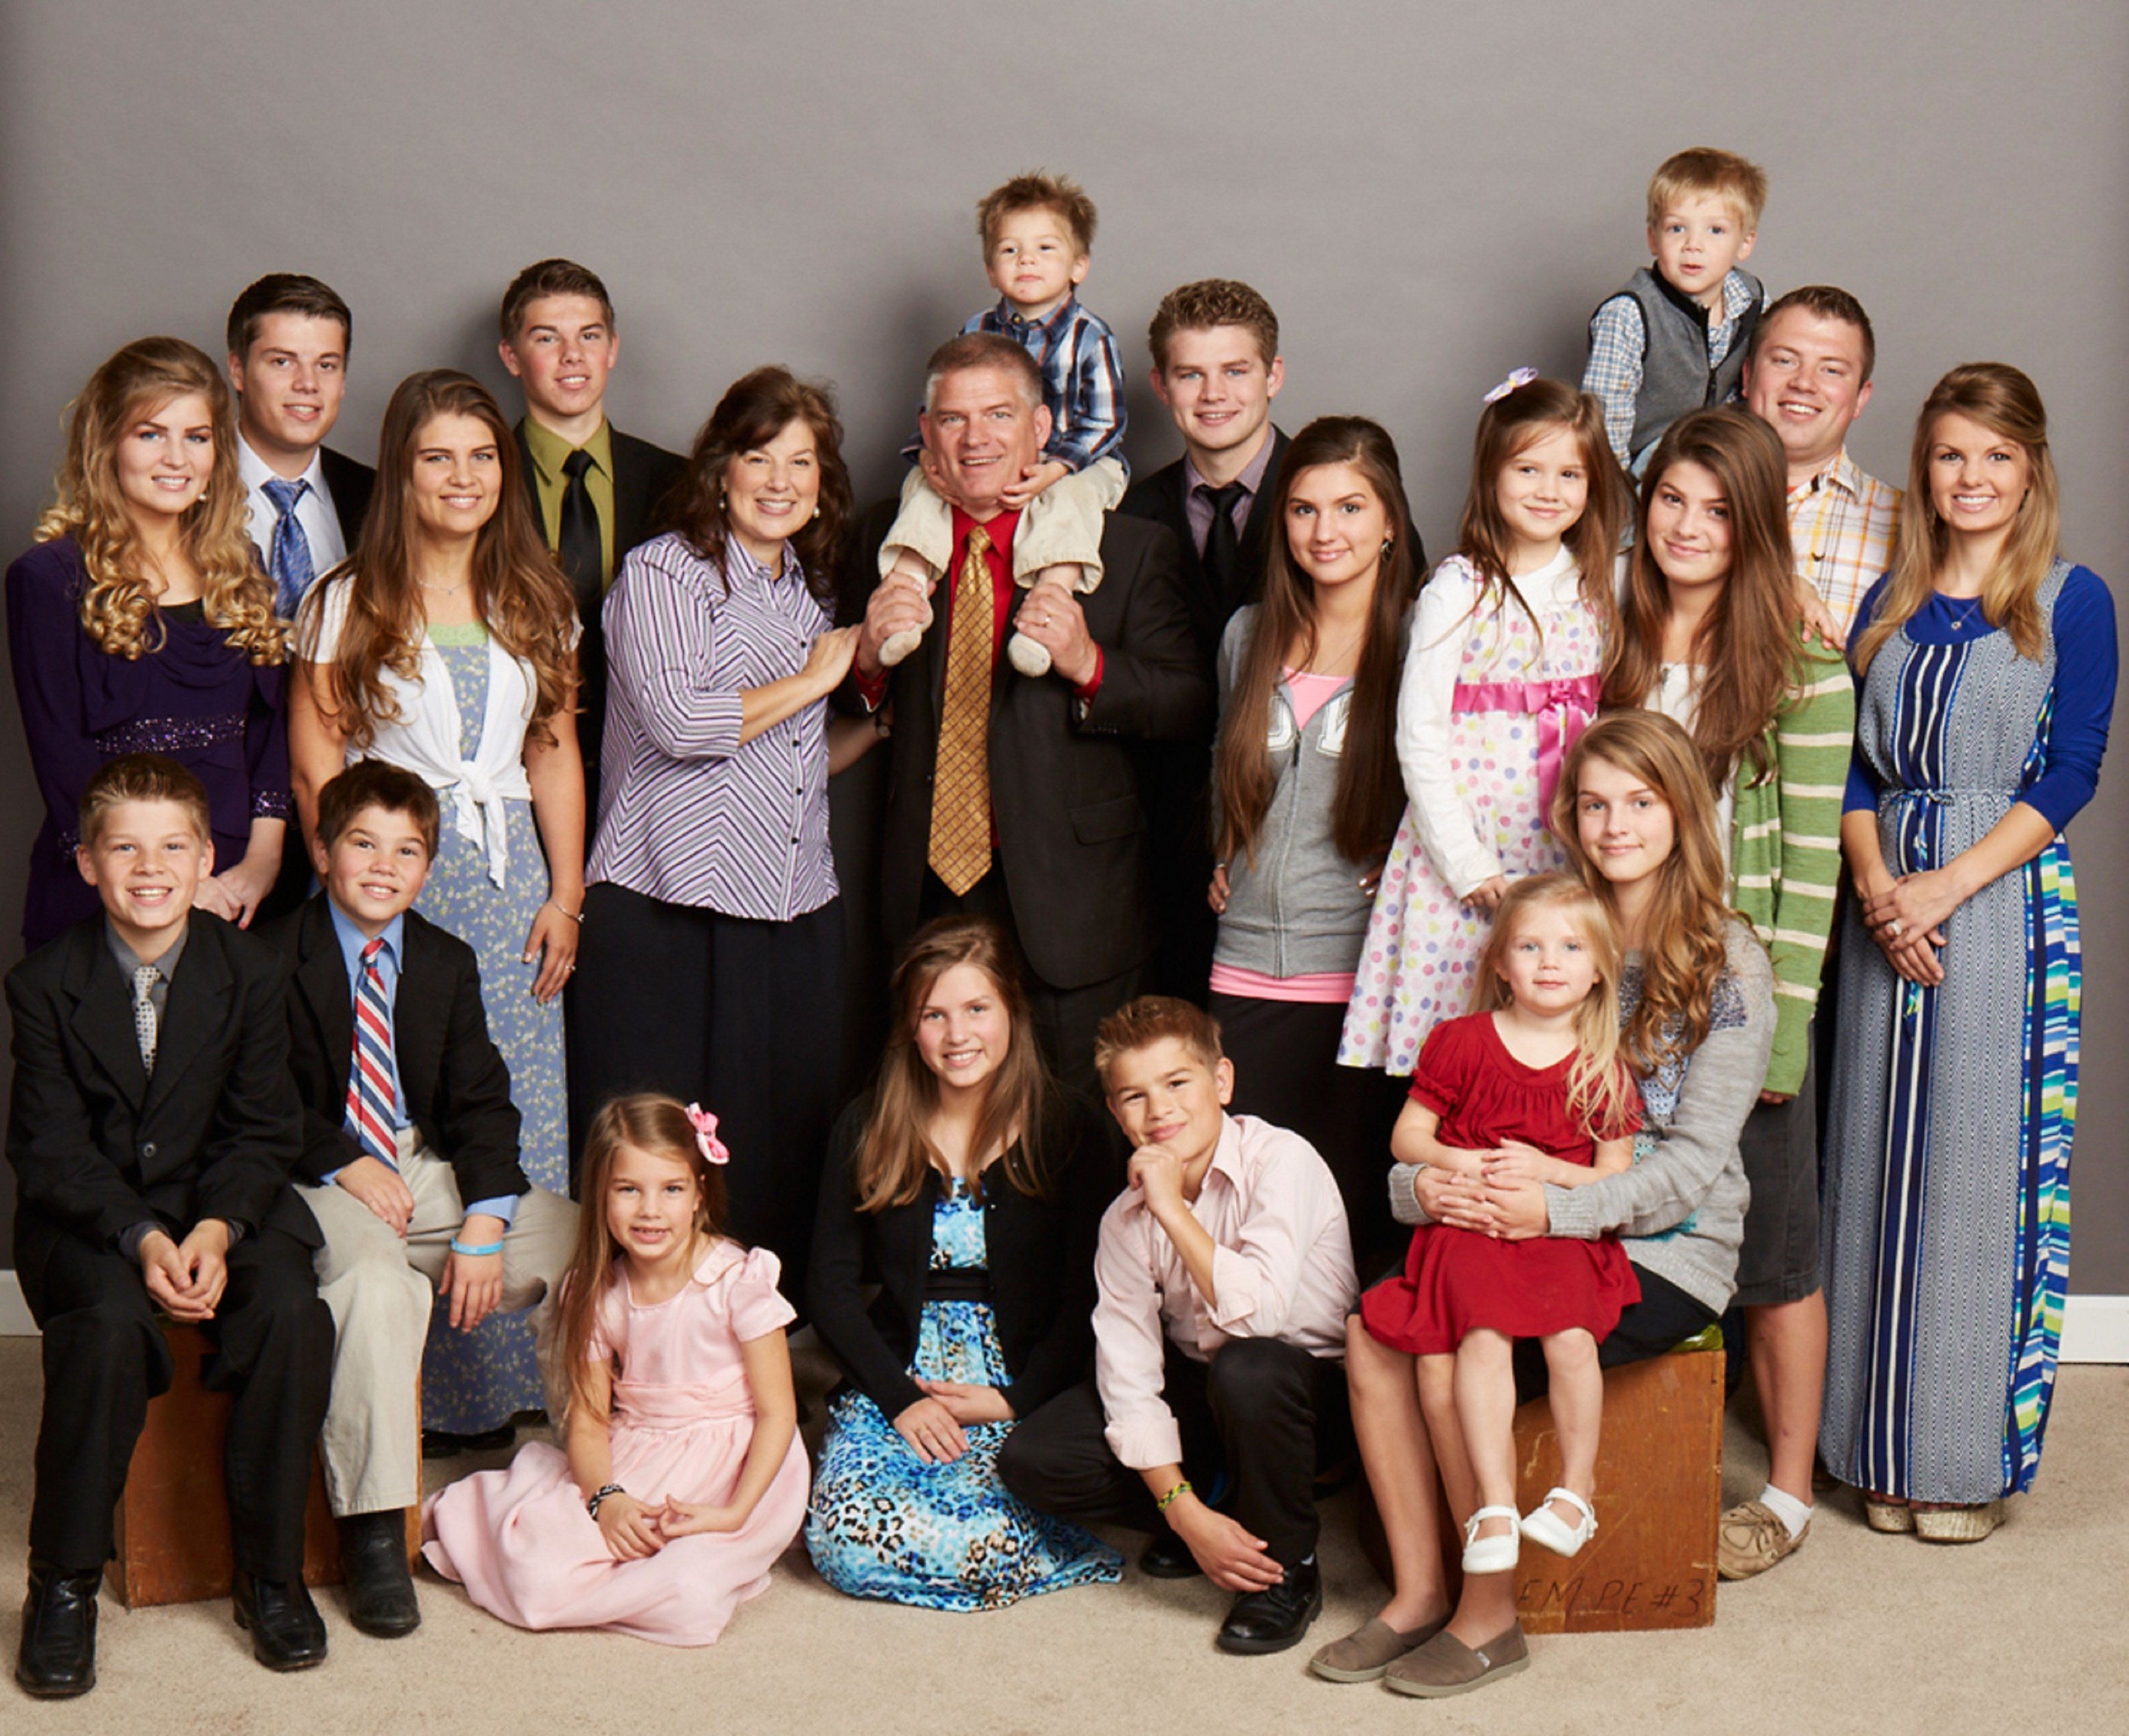 ‘Bringing up Bates’: The Bates Family Announces a Birth and a Wedding on Day of Show Cancelation